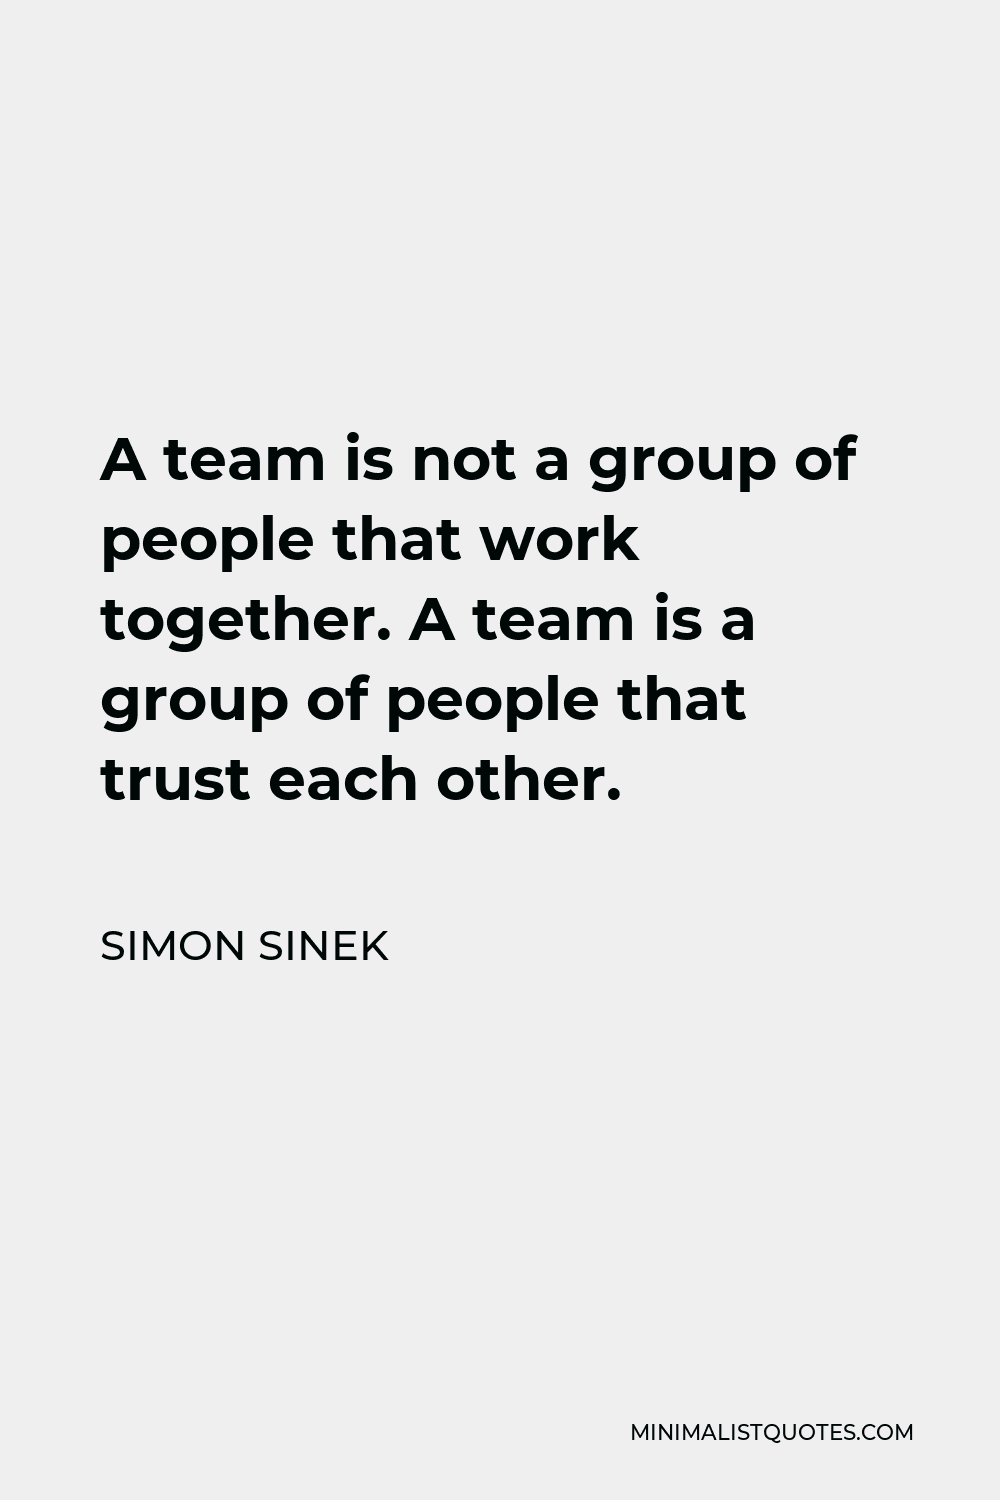 Simon Sinek Quote - A team is not a group of people that work together. A team is a group of people that trust each other.